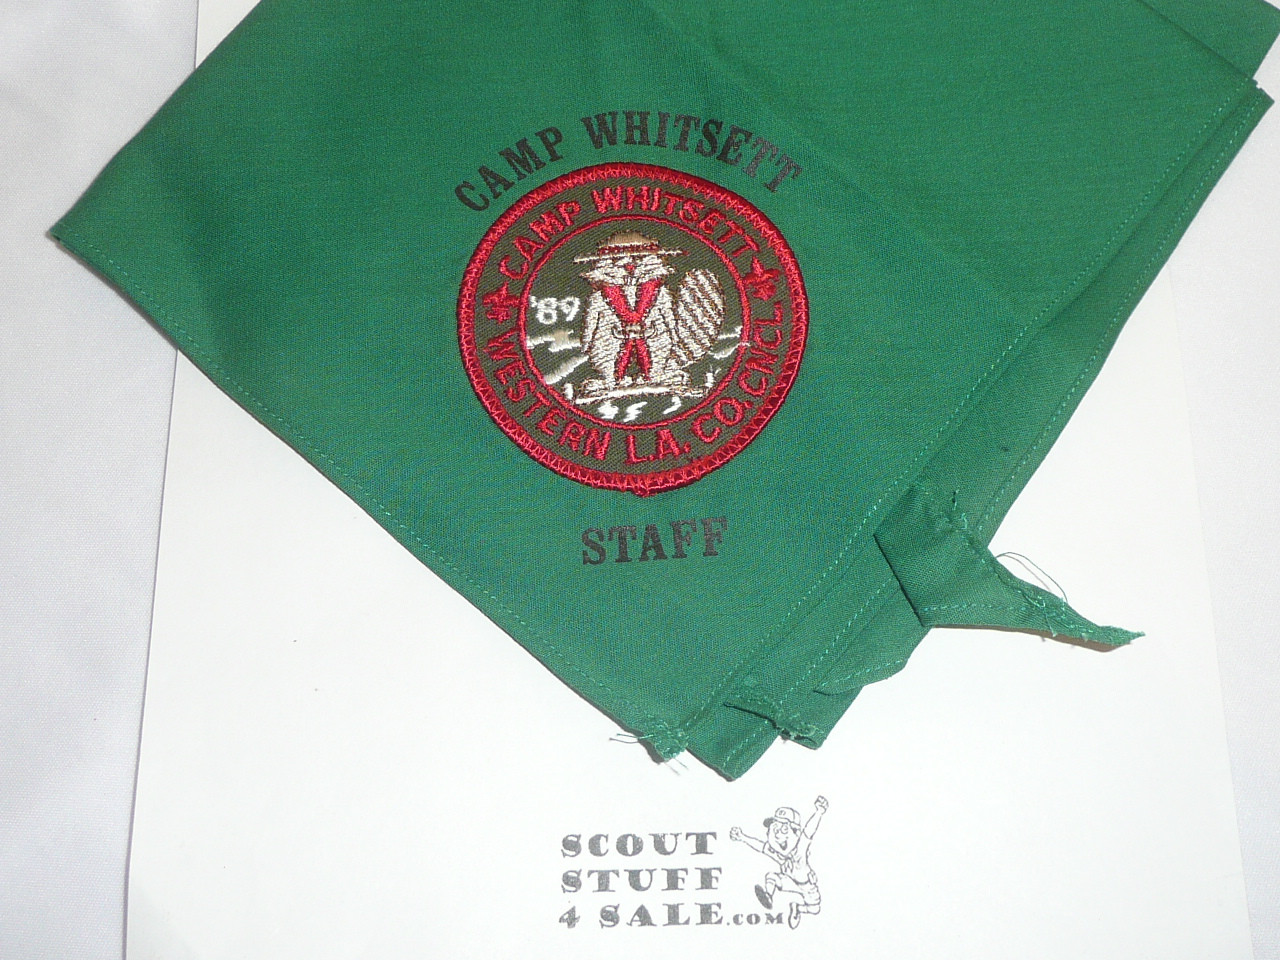 1989 Camp Whitsett STAFF Neckerchief, Western Los Angeles County Council